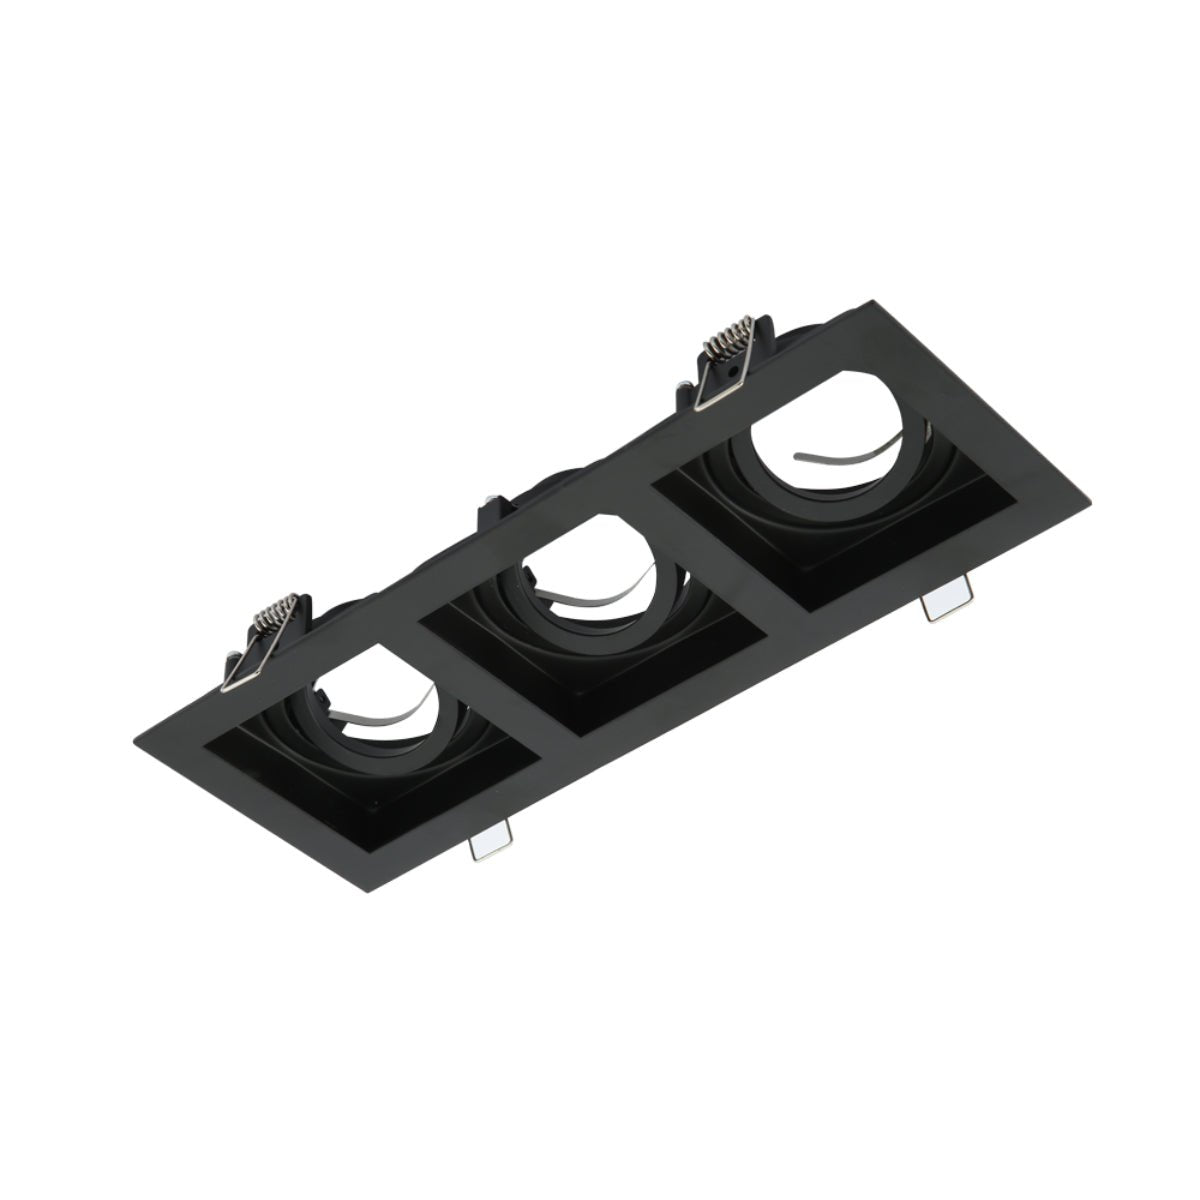 Main image of Grille Recessed Tilt Downlight Black with 3xGU10 Fitting | TEKLED 165-03882